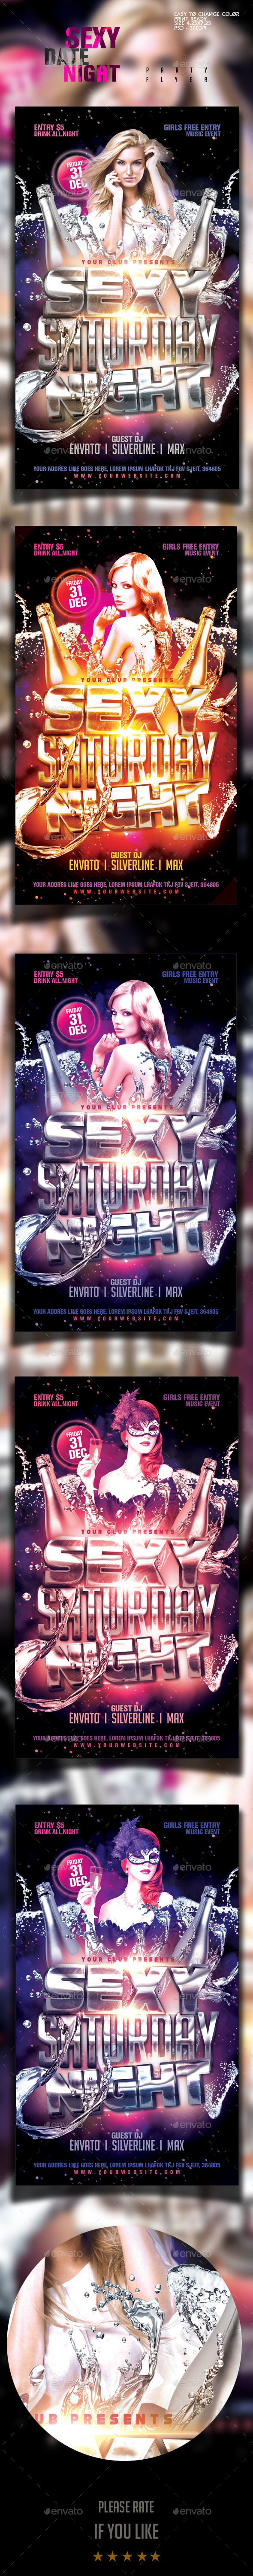 Sexy Saturday Night Party Flyer Template